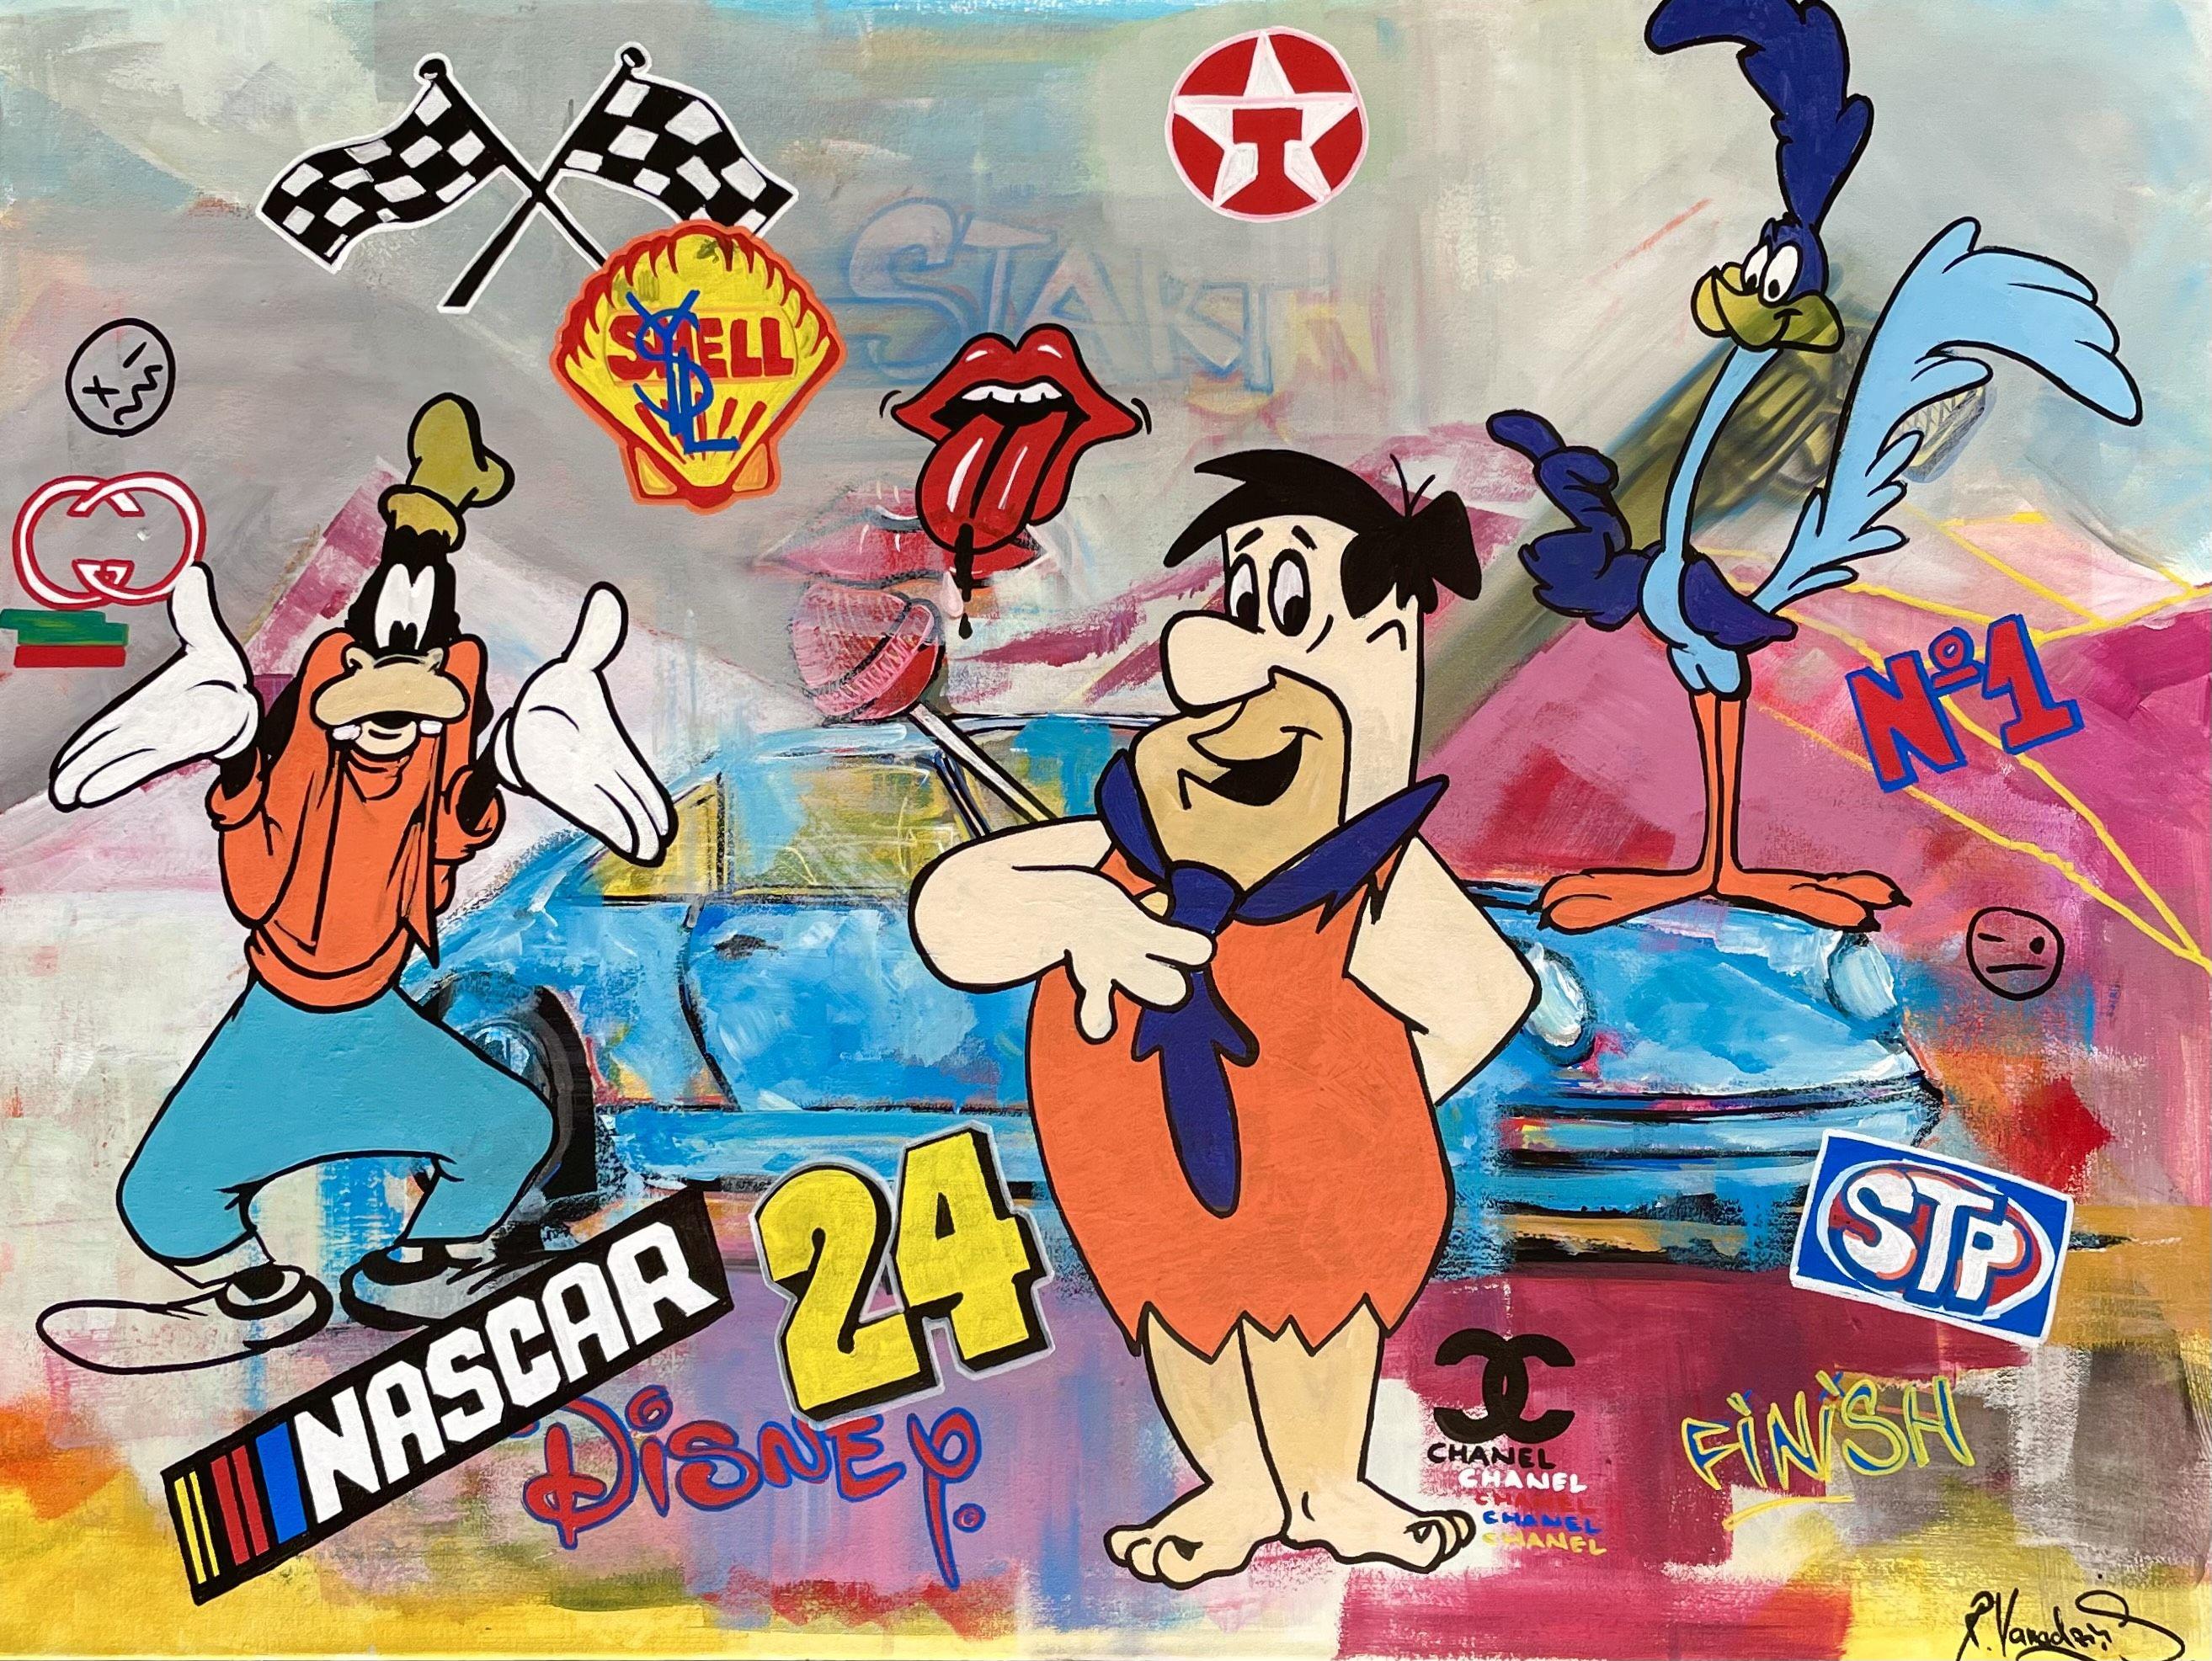 This Cartoon Race, artwork features beloved cartoon characters including Fred Flintstone, Road Runner, and Goofy in a thrilling car race. The characters are depicted in vibrant colors and appear to be speeding towards the finish line. In the